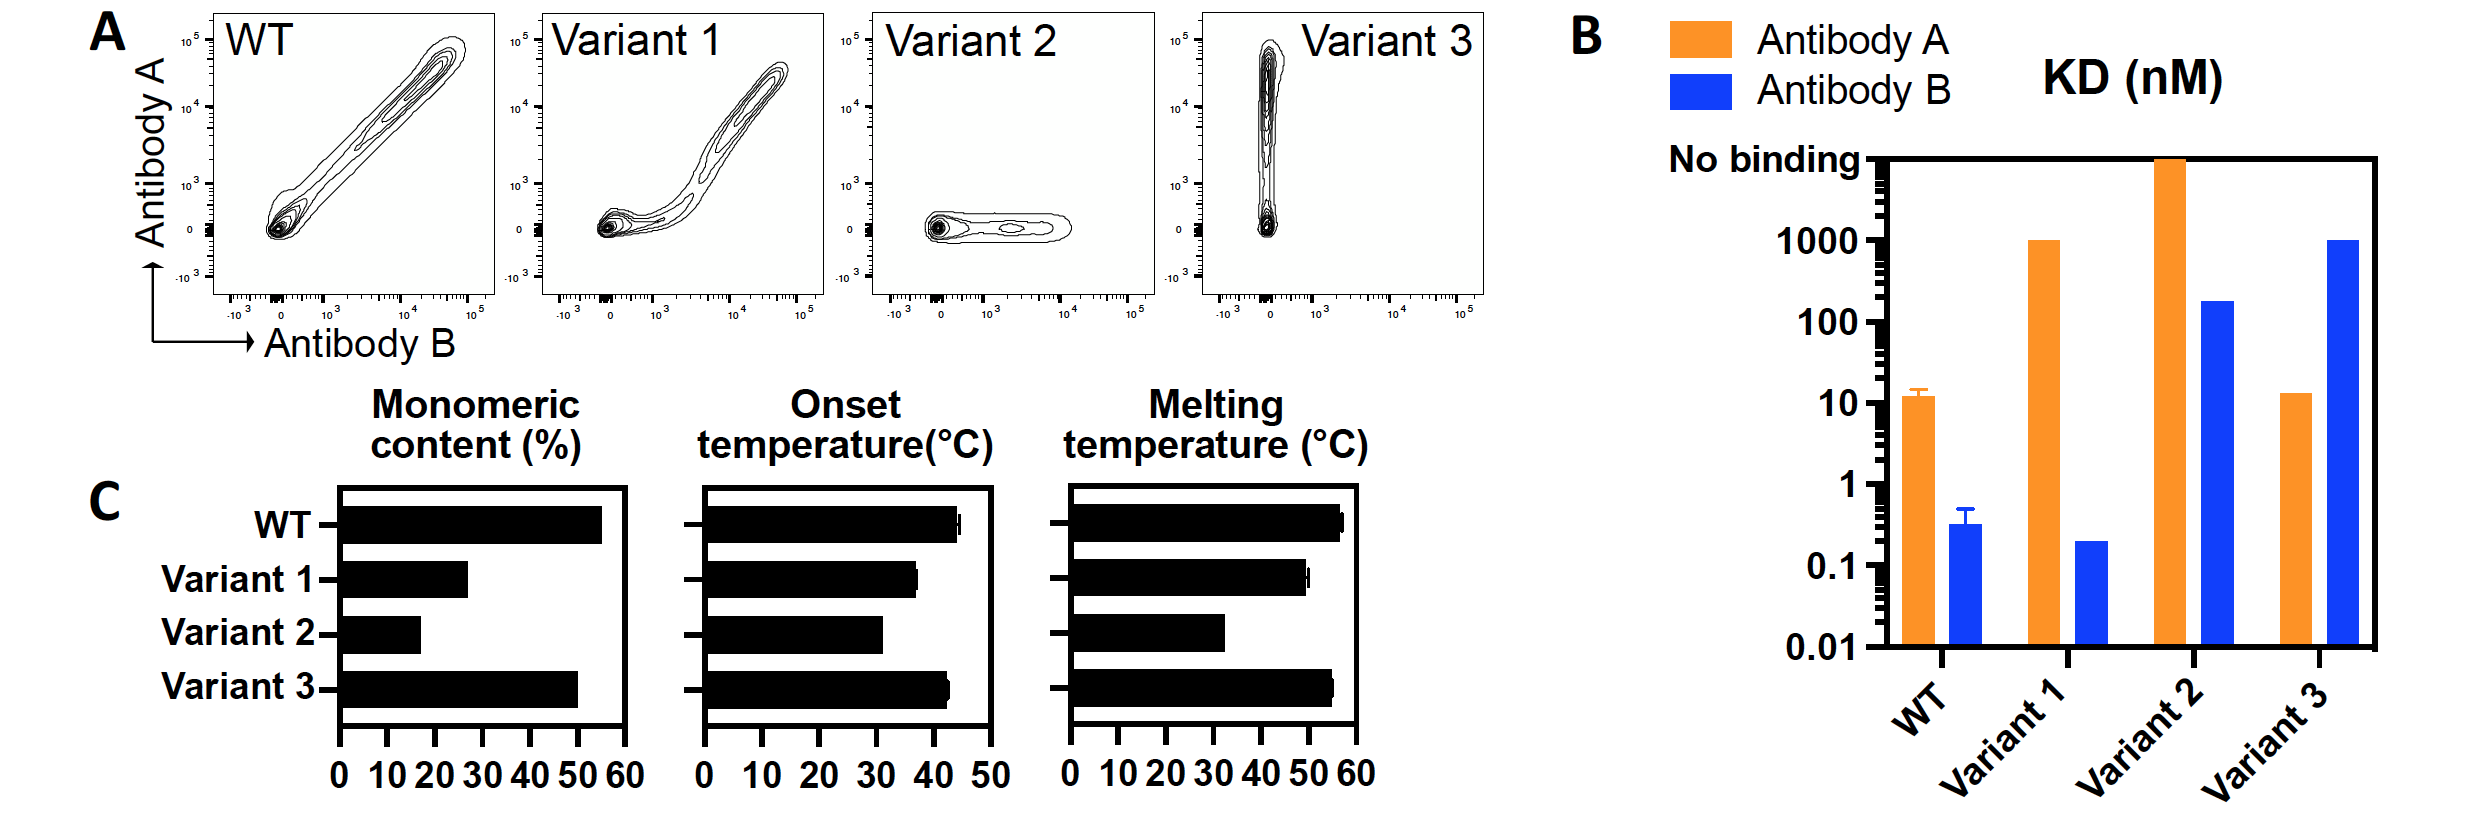 Variant 3 shows favorable biophysical properties and completely abolishes<br />
binding to antibody B